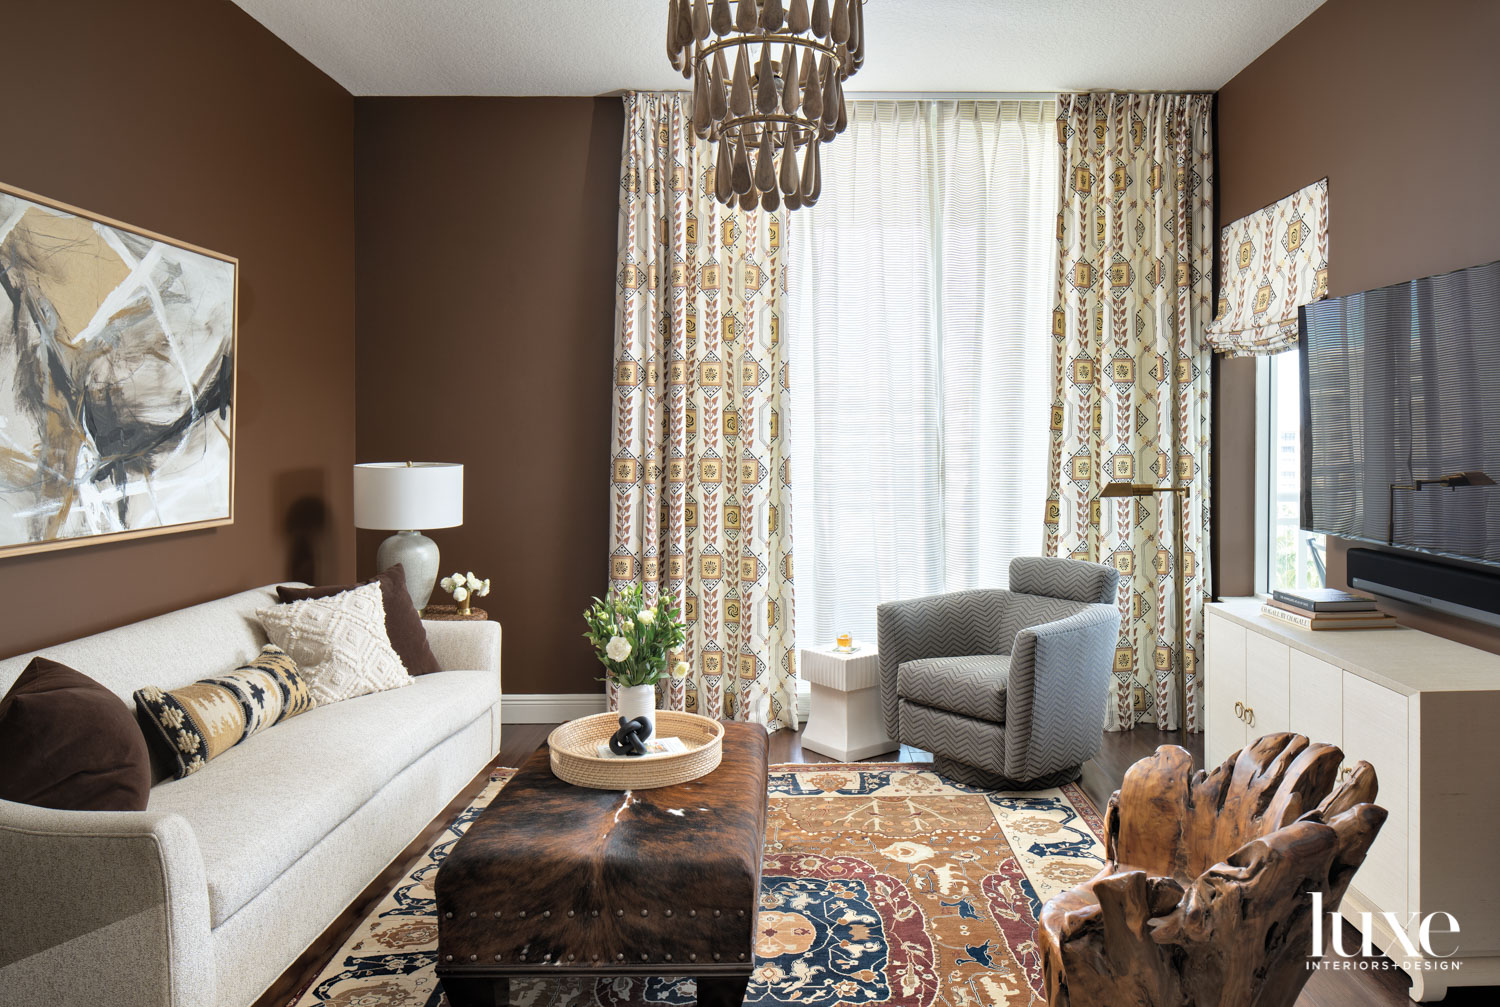 den with chocolate brown walls, white sofa, gray armchair Persian rug and patterned draperies